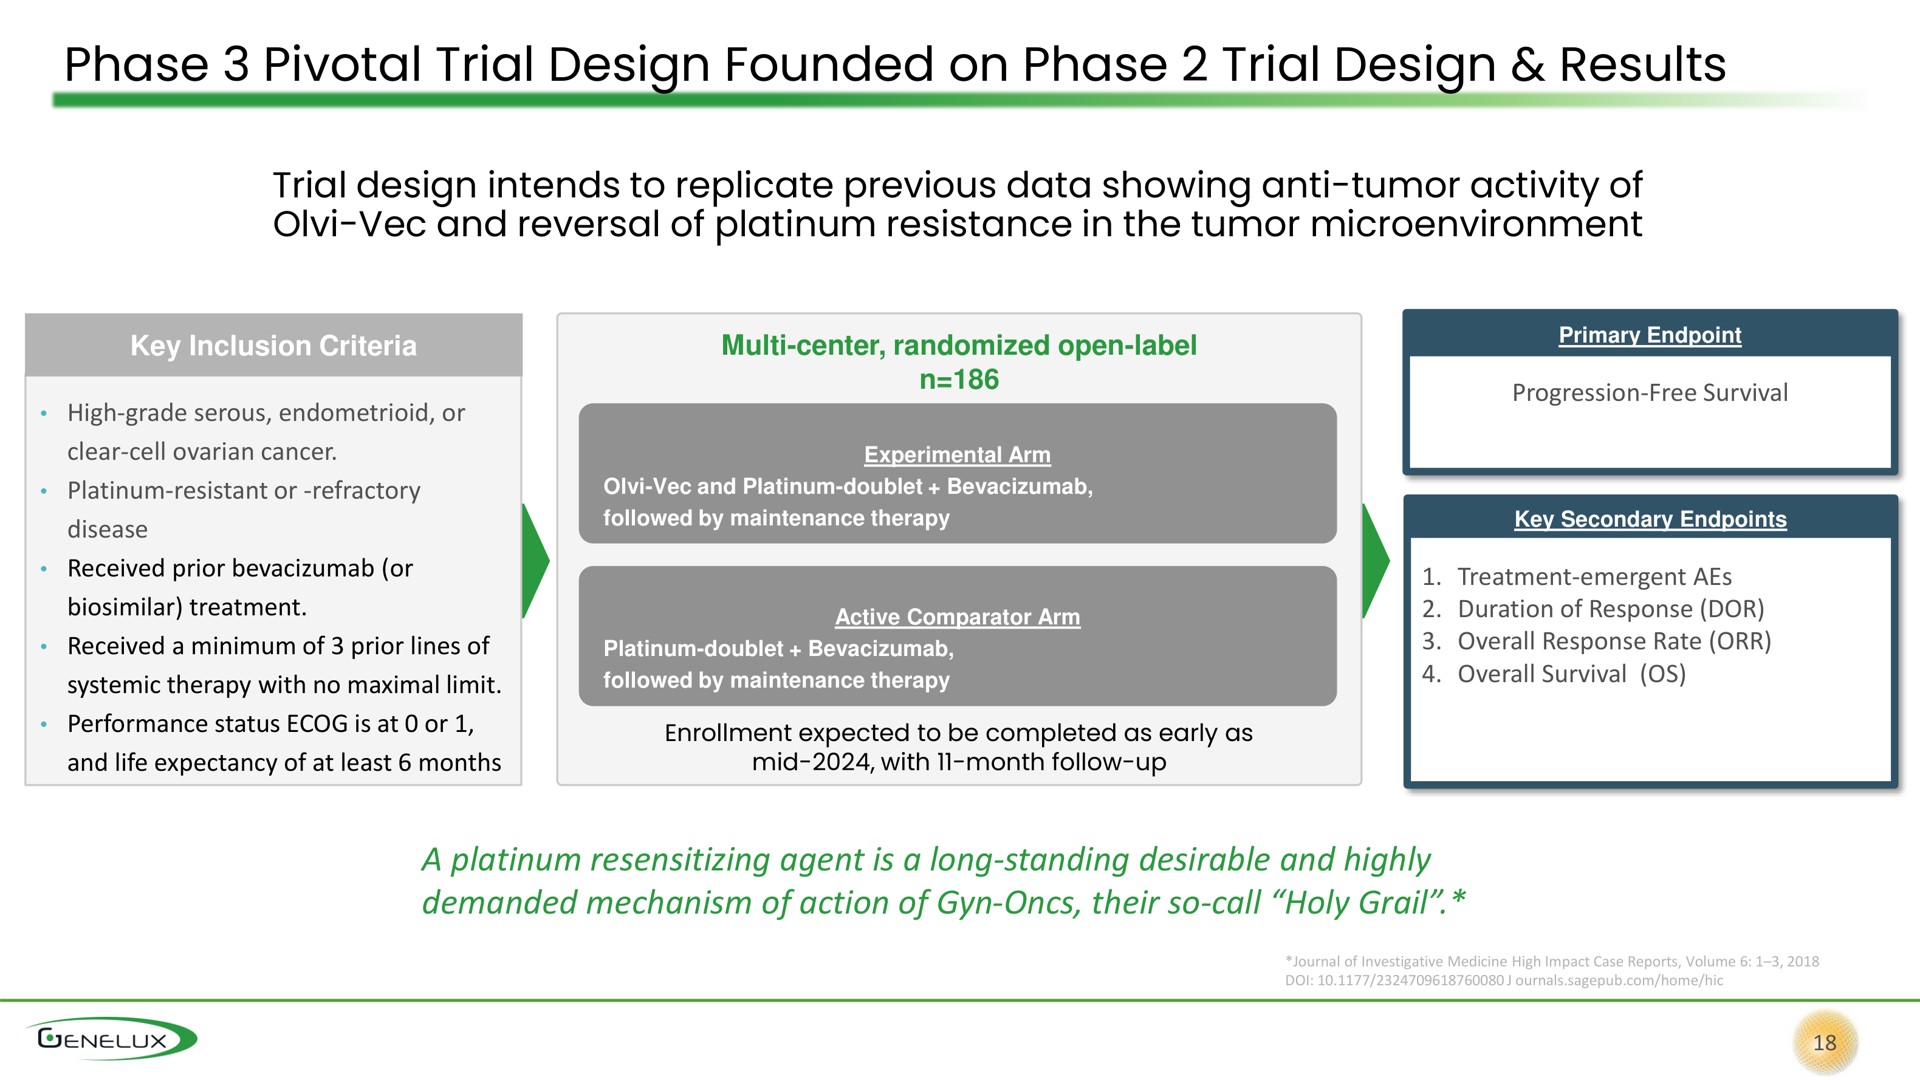 phase pivotal trial design founded on phase trial design results | Genelux